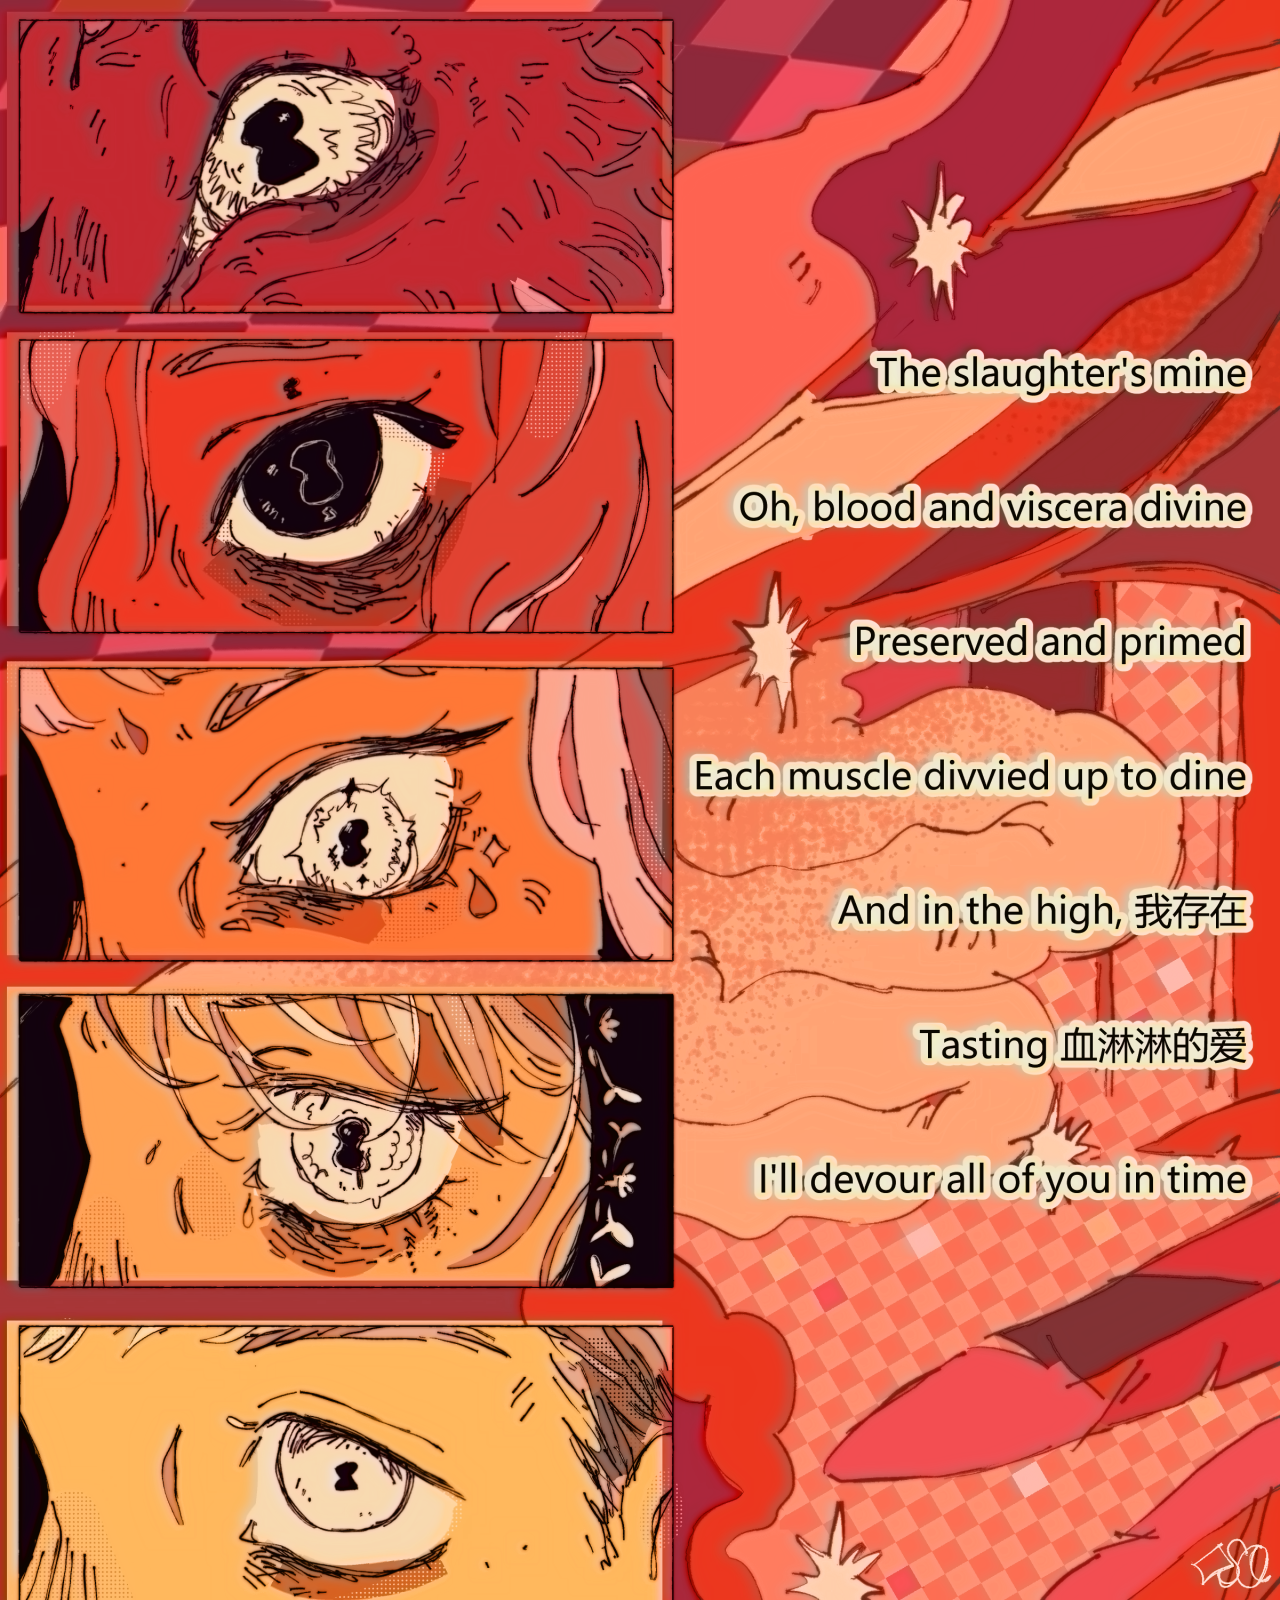 [ID: a piece of dungeon meshi fanart. on the left are five panels showing a closeup of a character's eye with the hourglass-shaped pupil of the demon: from top to bottom they are the winged lion, mithrun, thistle, marcille & laios. the background, extending to the right, is abstract veins, intestines, feathers & checkerboards. text above, lyrics from butcher vanity - flavor foley, reads:  "The slaughter's mine Oh, blood and viscera divine Preserved and primed Each muscle divvied up to dine And in the high, 我存在 Tasting 血淋淋的爱 I'll devour all of you in time" End ID.]